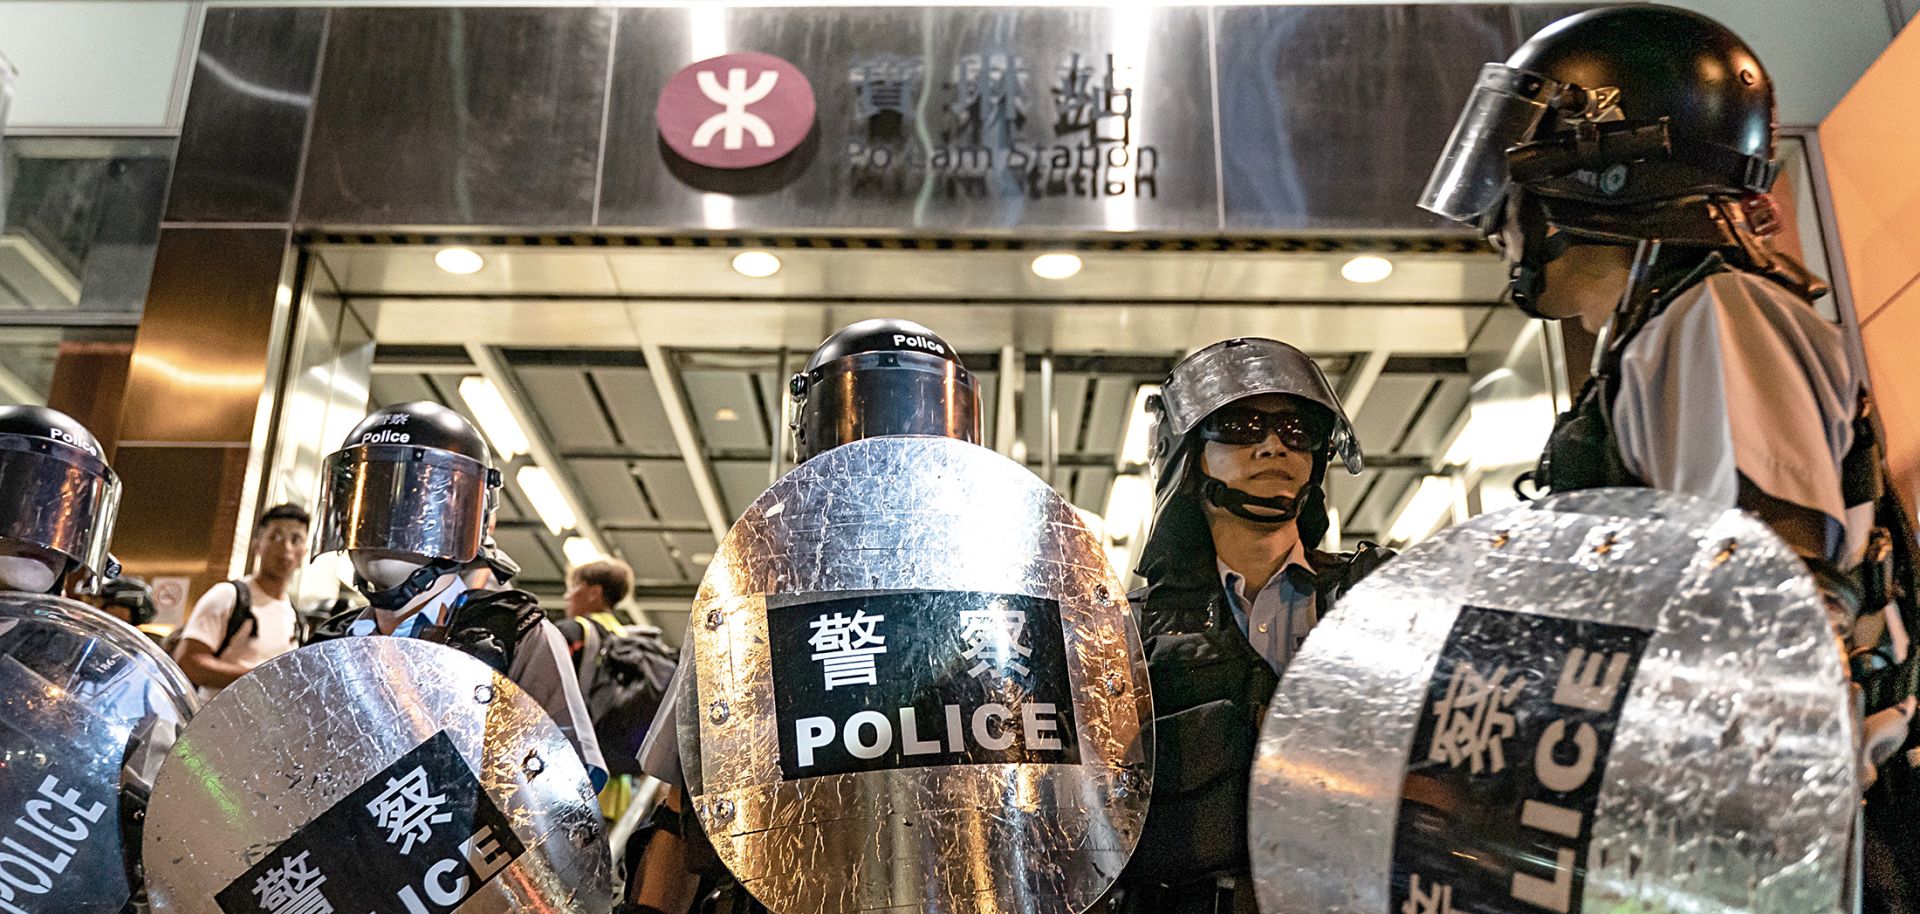 Police officers stand guard at Hong Kong's Po Lam Station during a standoff with protesters on Sept. 5, 2019.